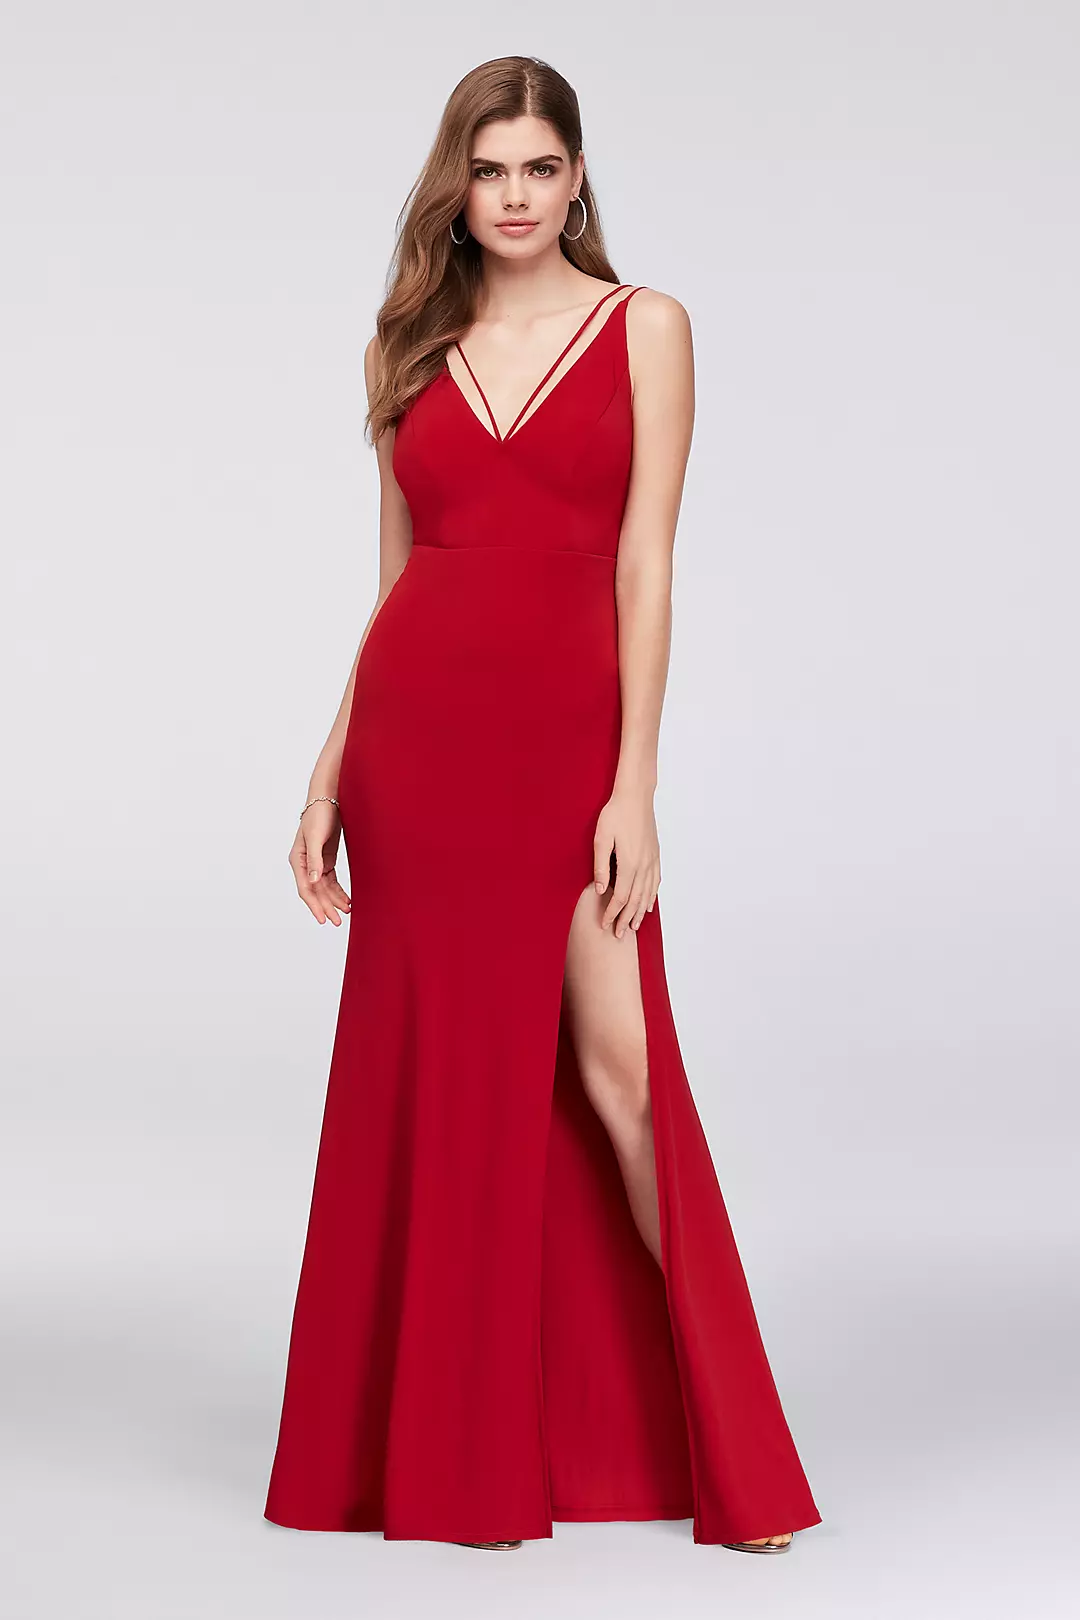 Double Strap Plunging Neckline Jersey Sheath Gown Image